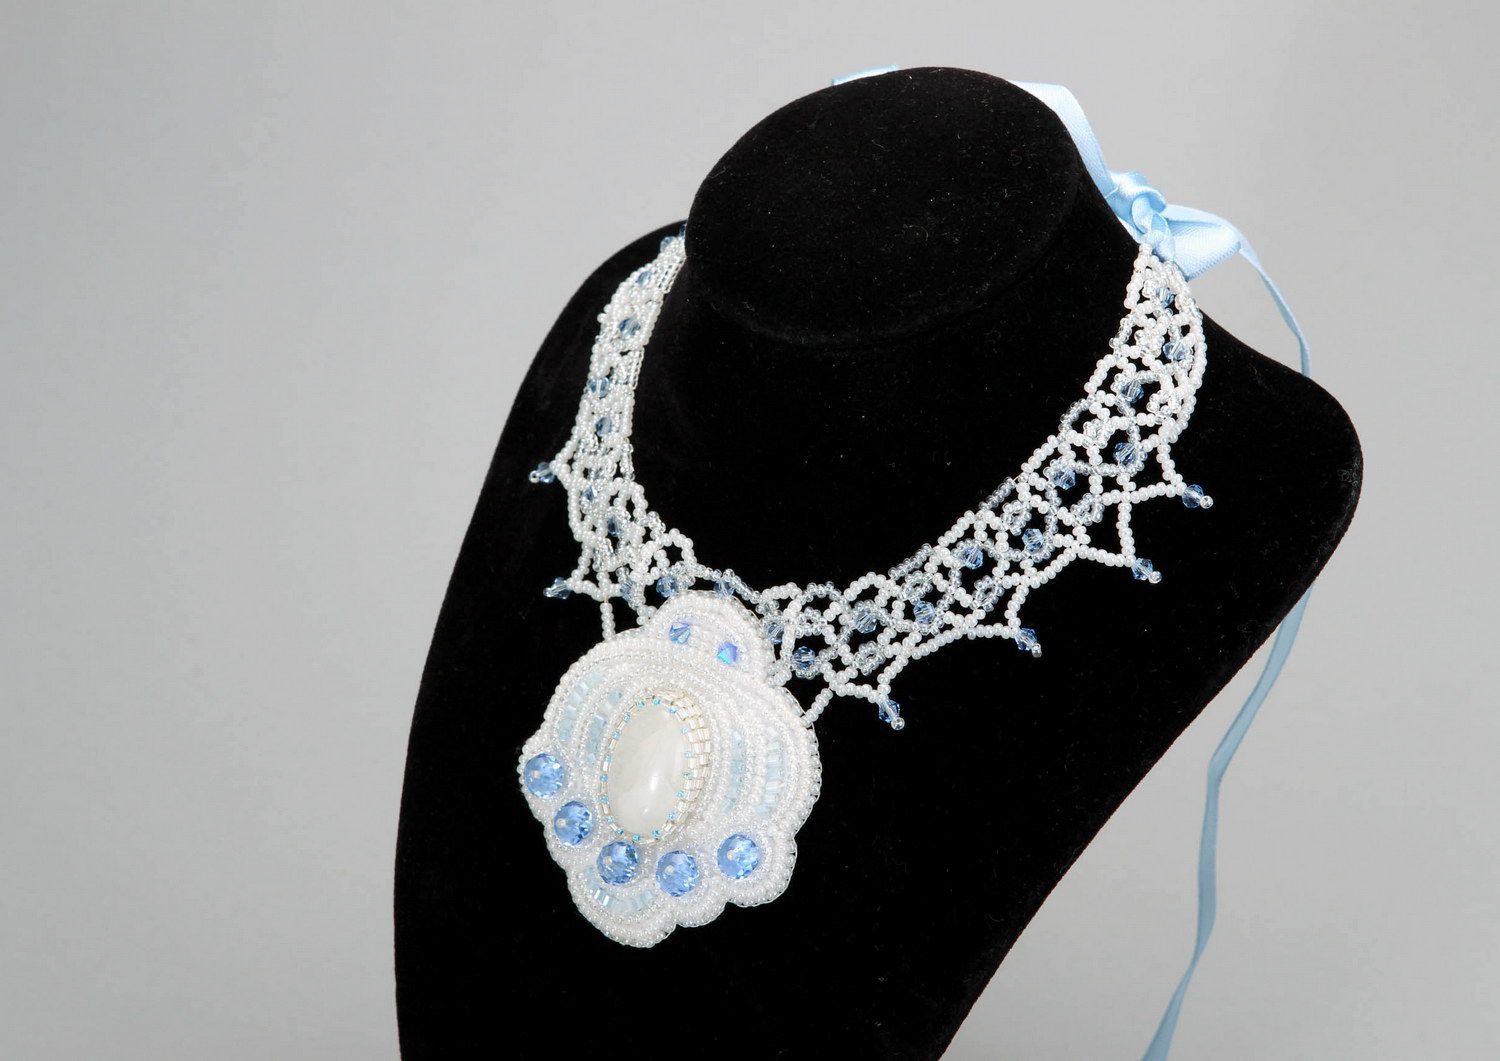 Necklace made of beads & moonstone photo 3